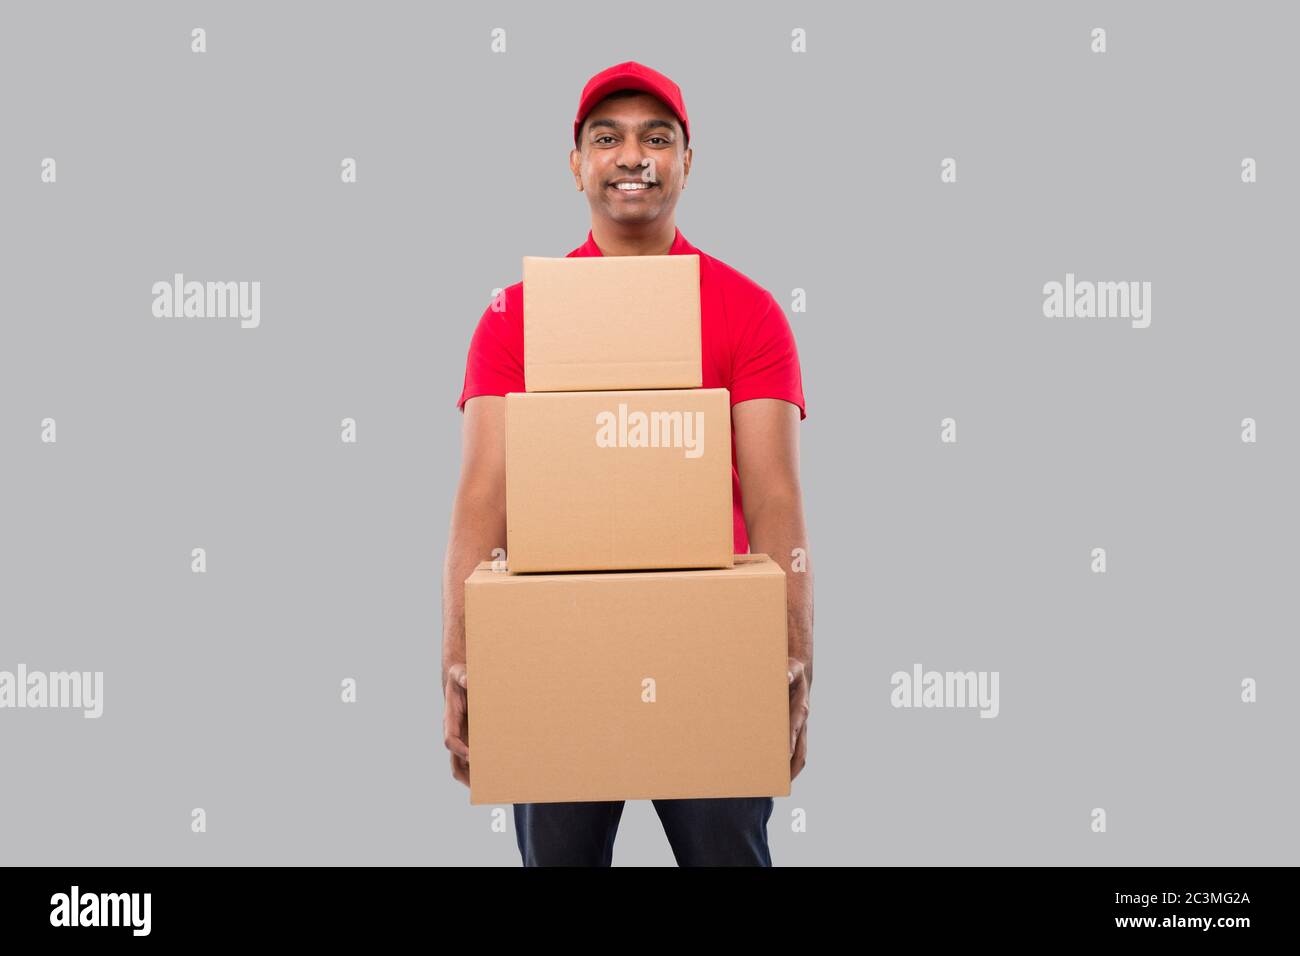 Delivery Man Holding Carton Boxes Isolated. Indian Delivery Boy Smiling with Boxes in Hands Stock Photo